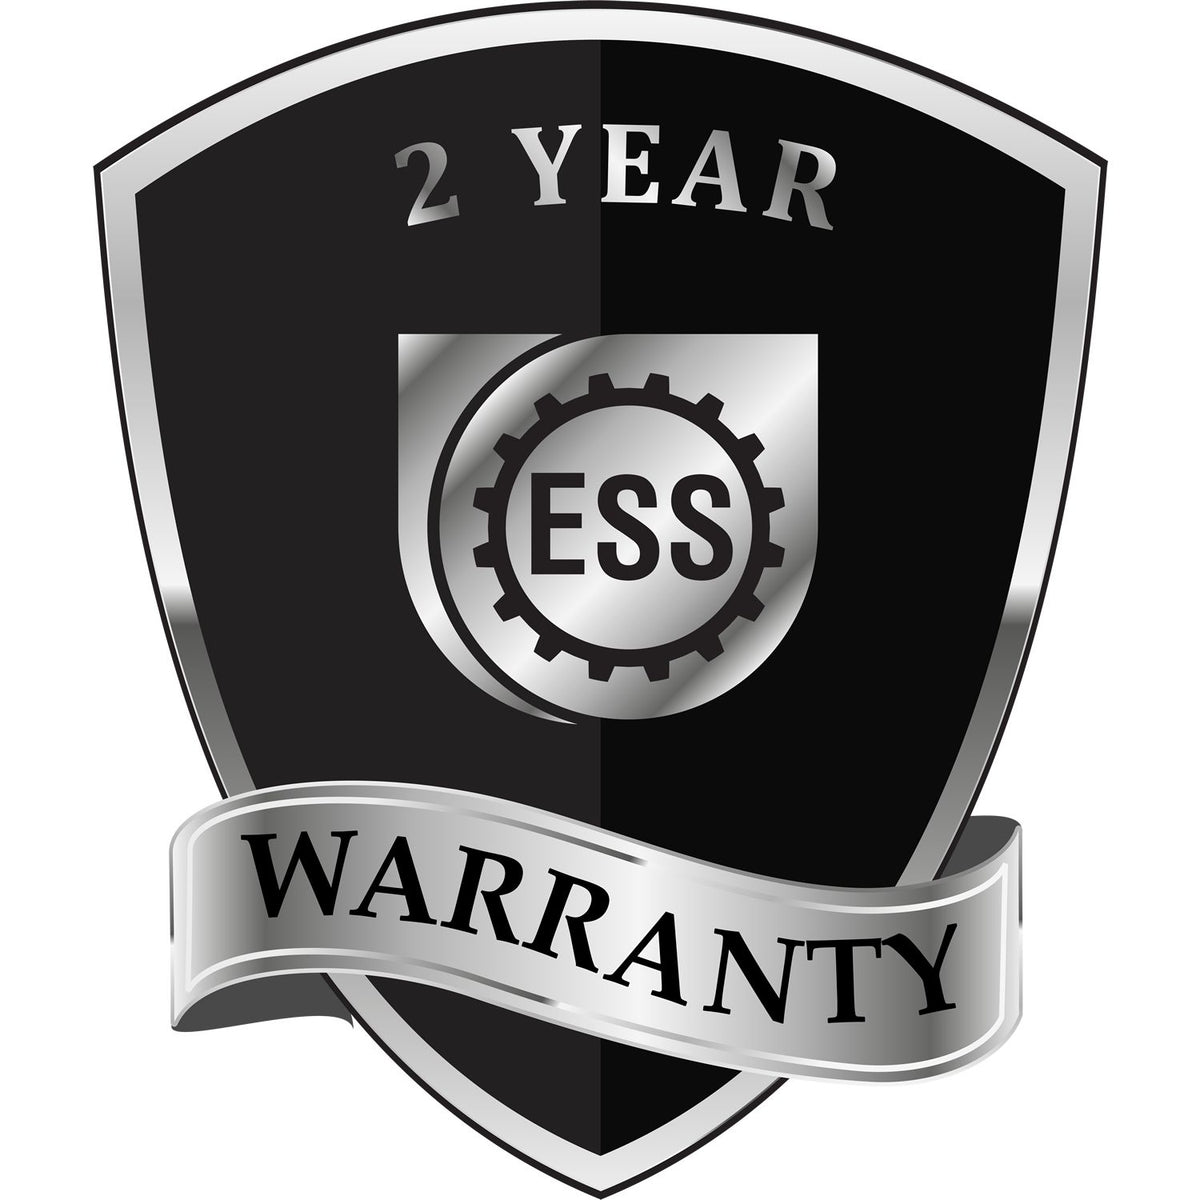 A black and silver badge or emblem showing warranty information for the Gift Kentucky Geologist Seal